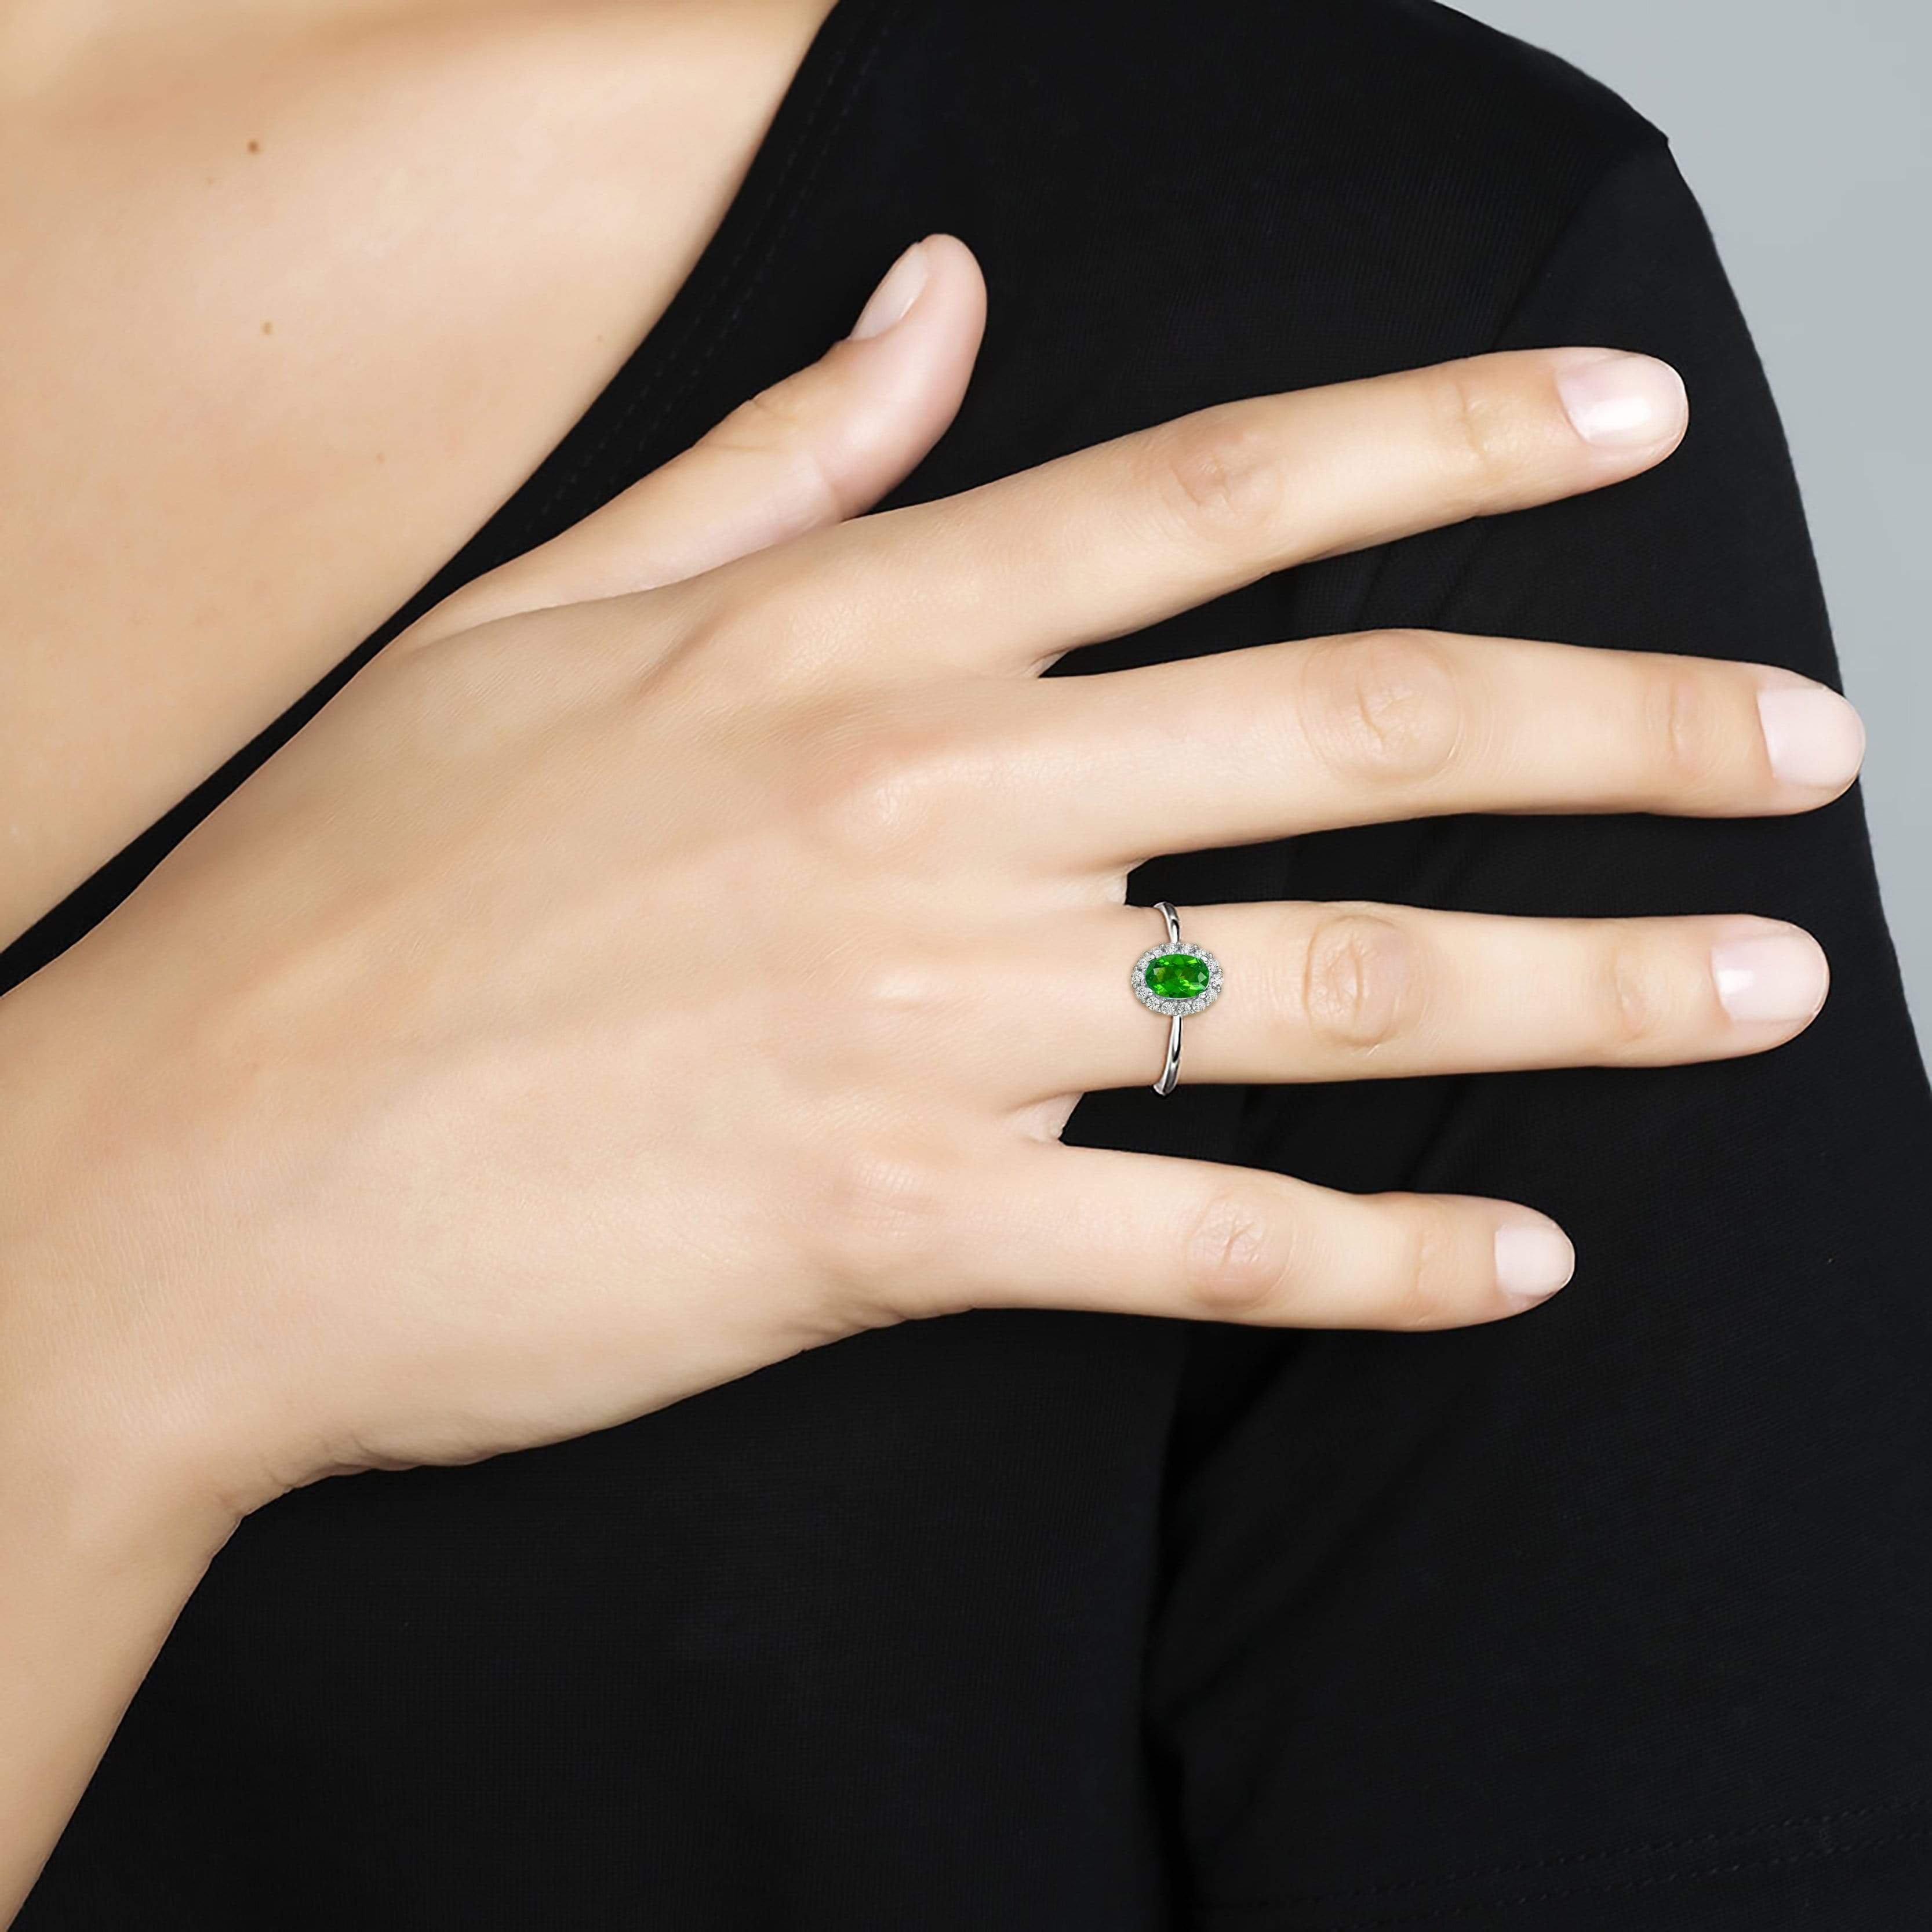 Lynora Jewellery Ring Opulence Halo Ring Sterling Silver & Emerald Stone